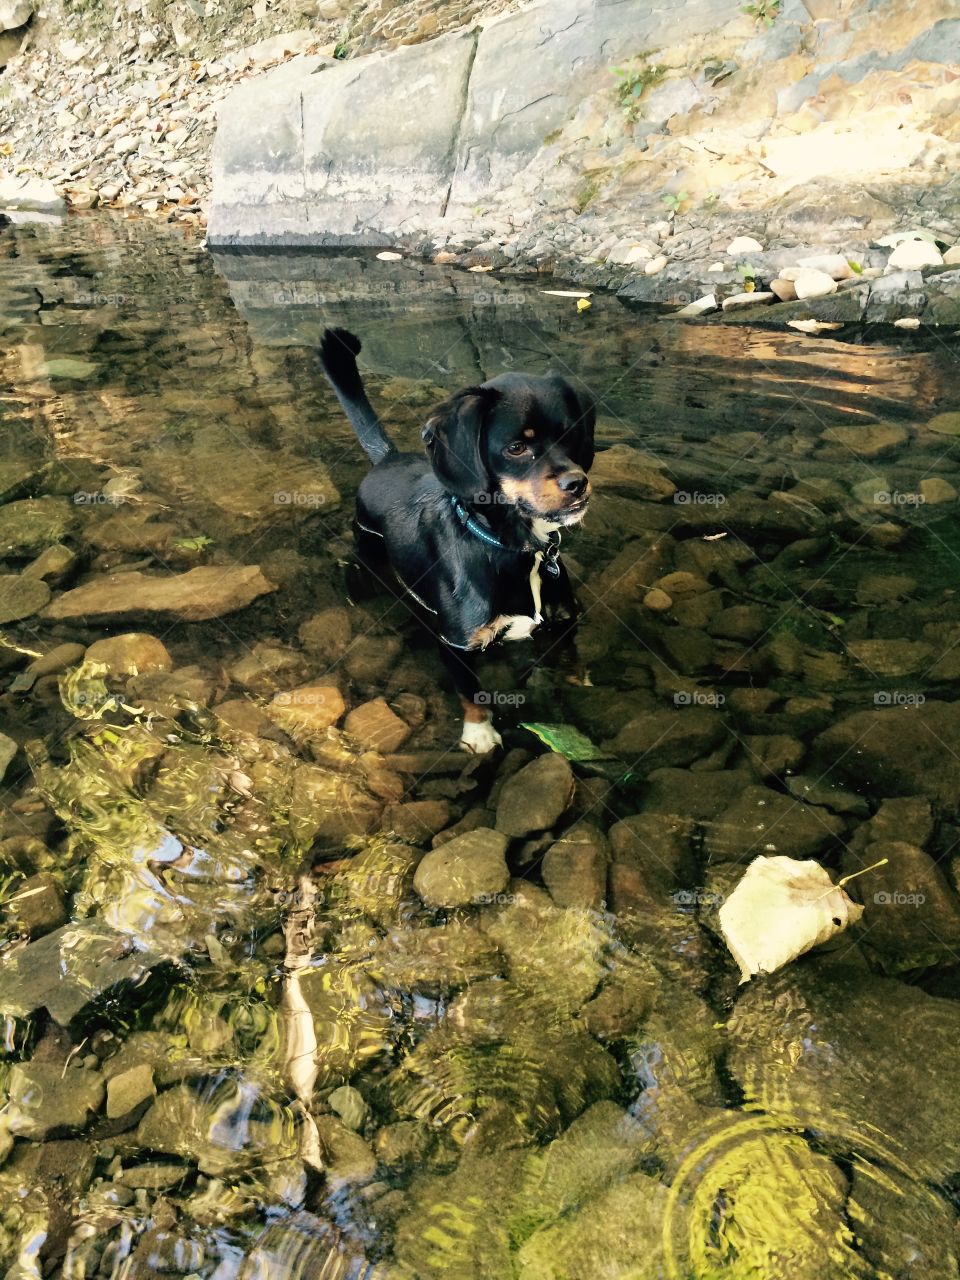 Sweet summertime . Got out of work early and took the pup to the creek,